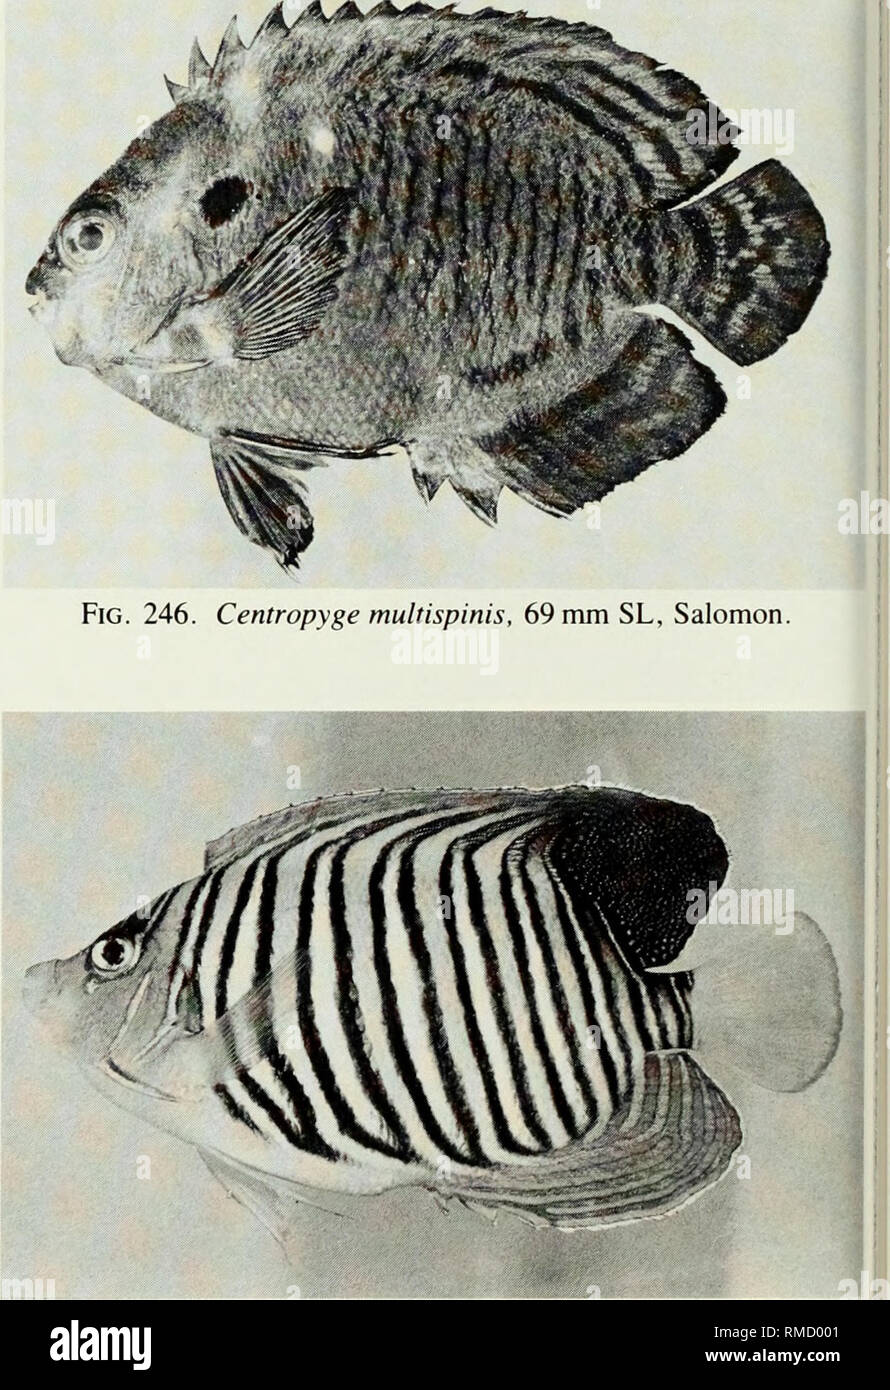 An annotated checklist of the fishes of the Chagos Archipelago, Central  Indian Ocean. Fishes. Fig. 247. Pomacanthus imperator, 240 mm SL, Peros  Banhos. Fig. 248. Pygoplites diacanthus, 142 mm SL, Salomon.